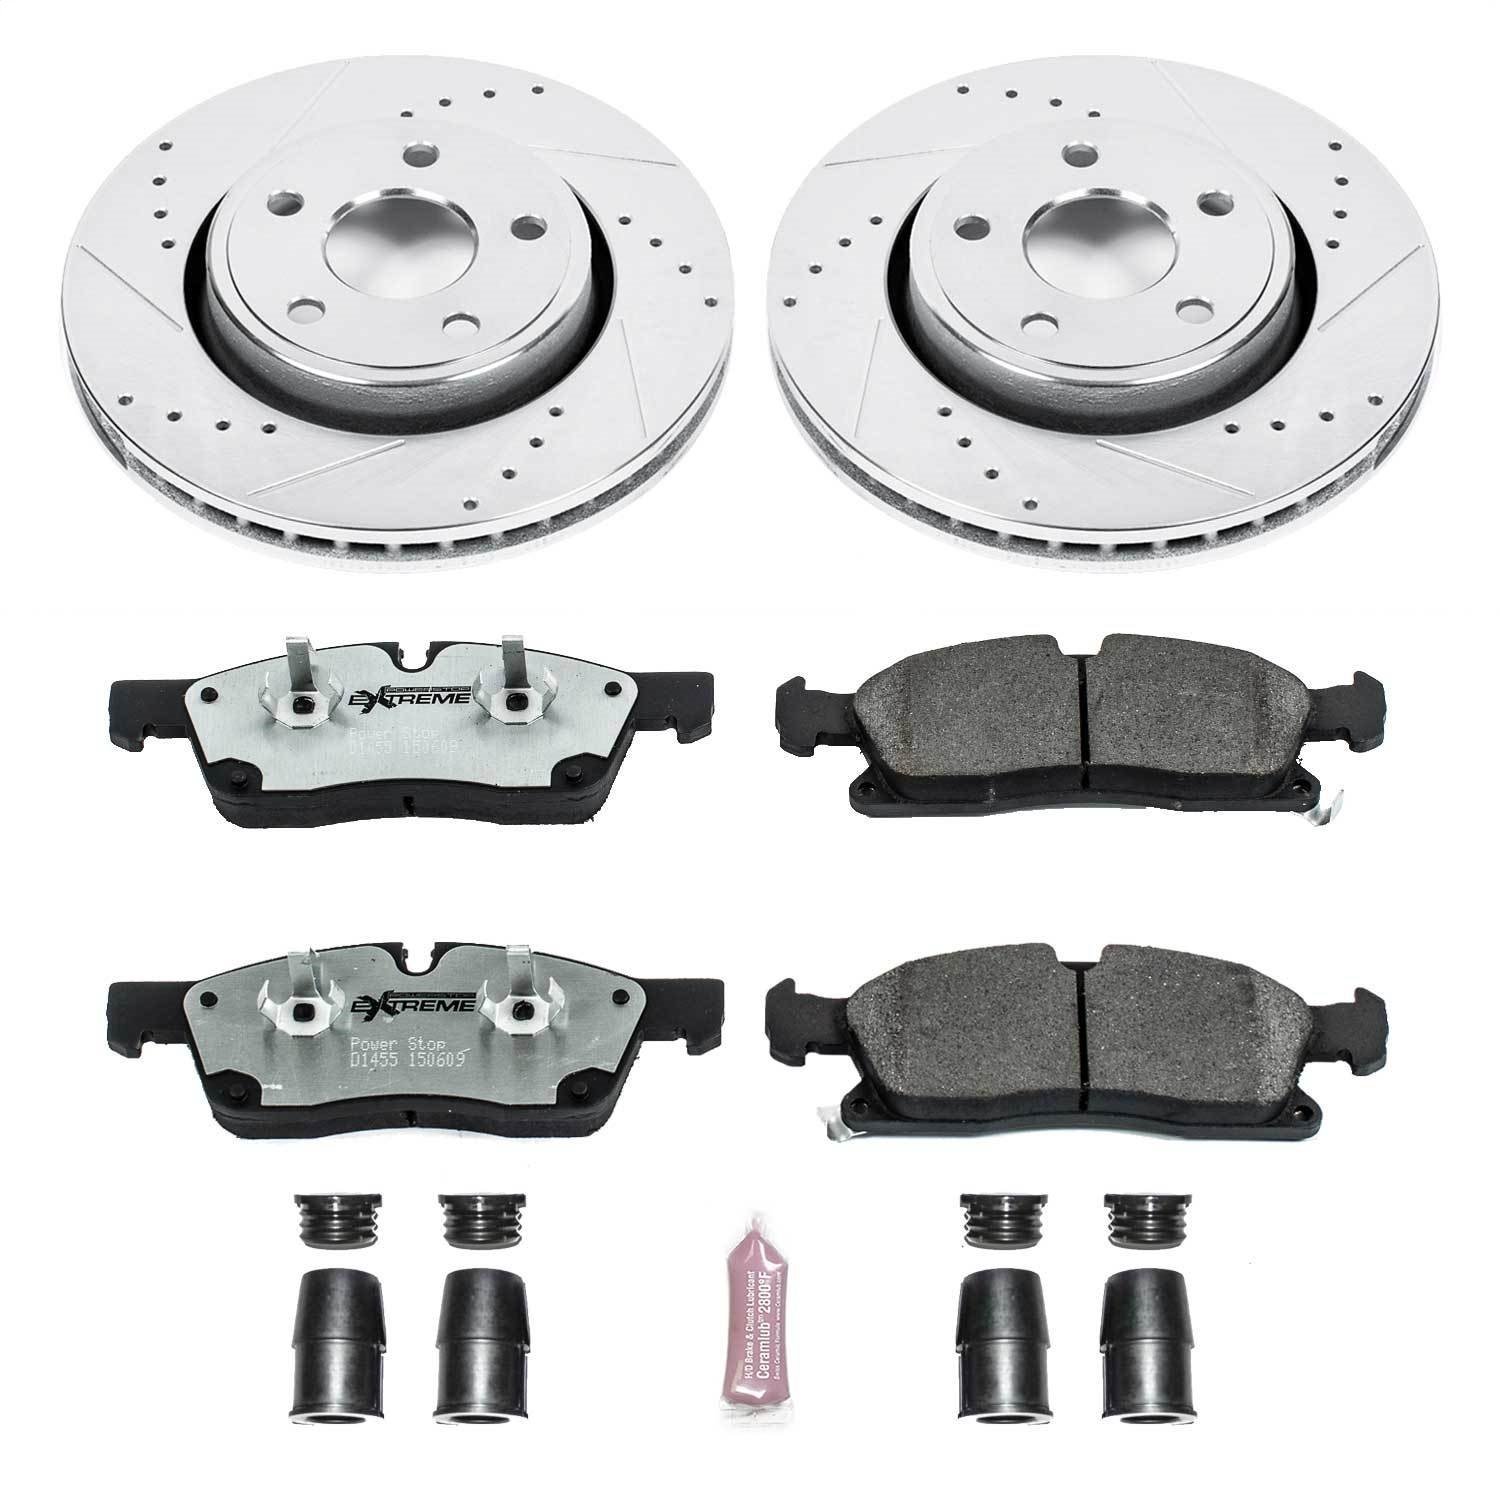 Street Warrior Brake Upgrade Kit Cross-Drilled and Slotted Rotors Z26 Extreme Street Performance Brake Pads Complete Front Kit